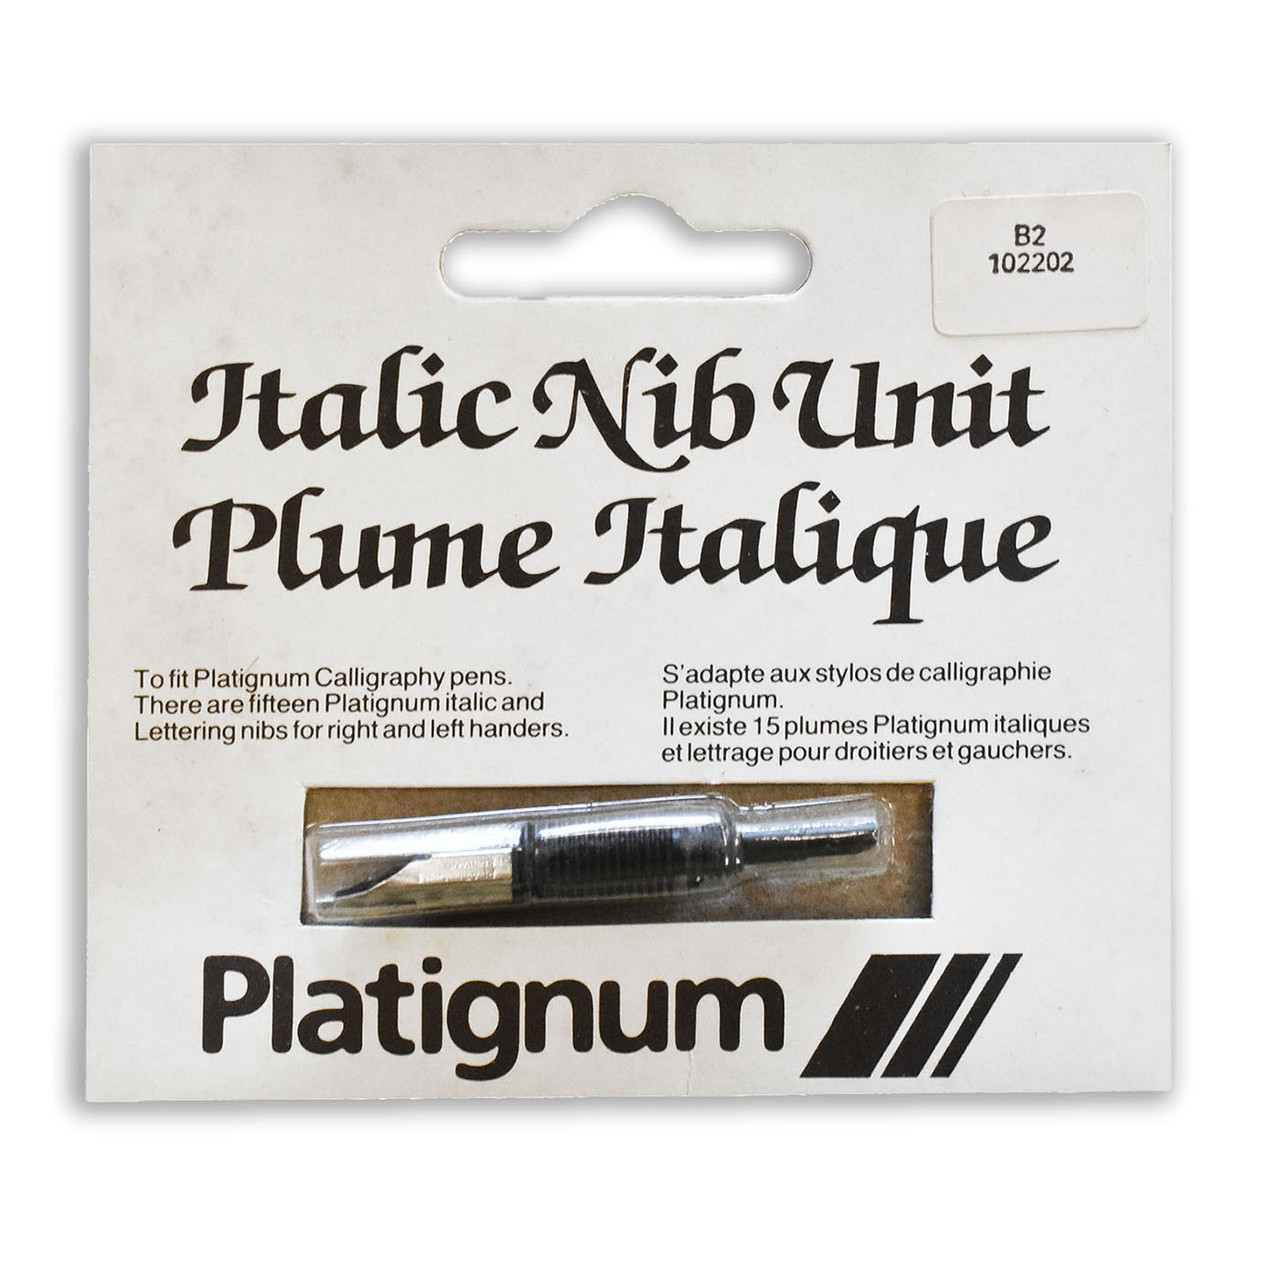 Platignum Lettering Set 6 Nib Units Fountain Pen in Package Calligraphy 